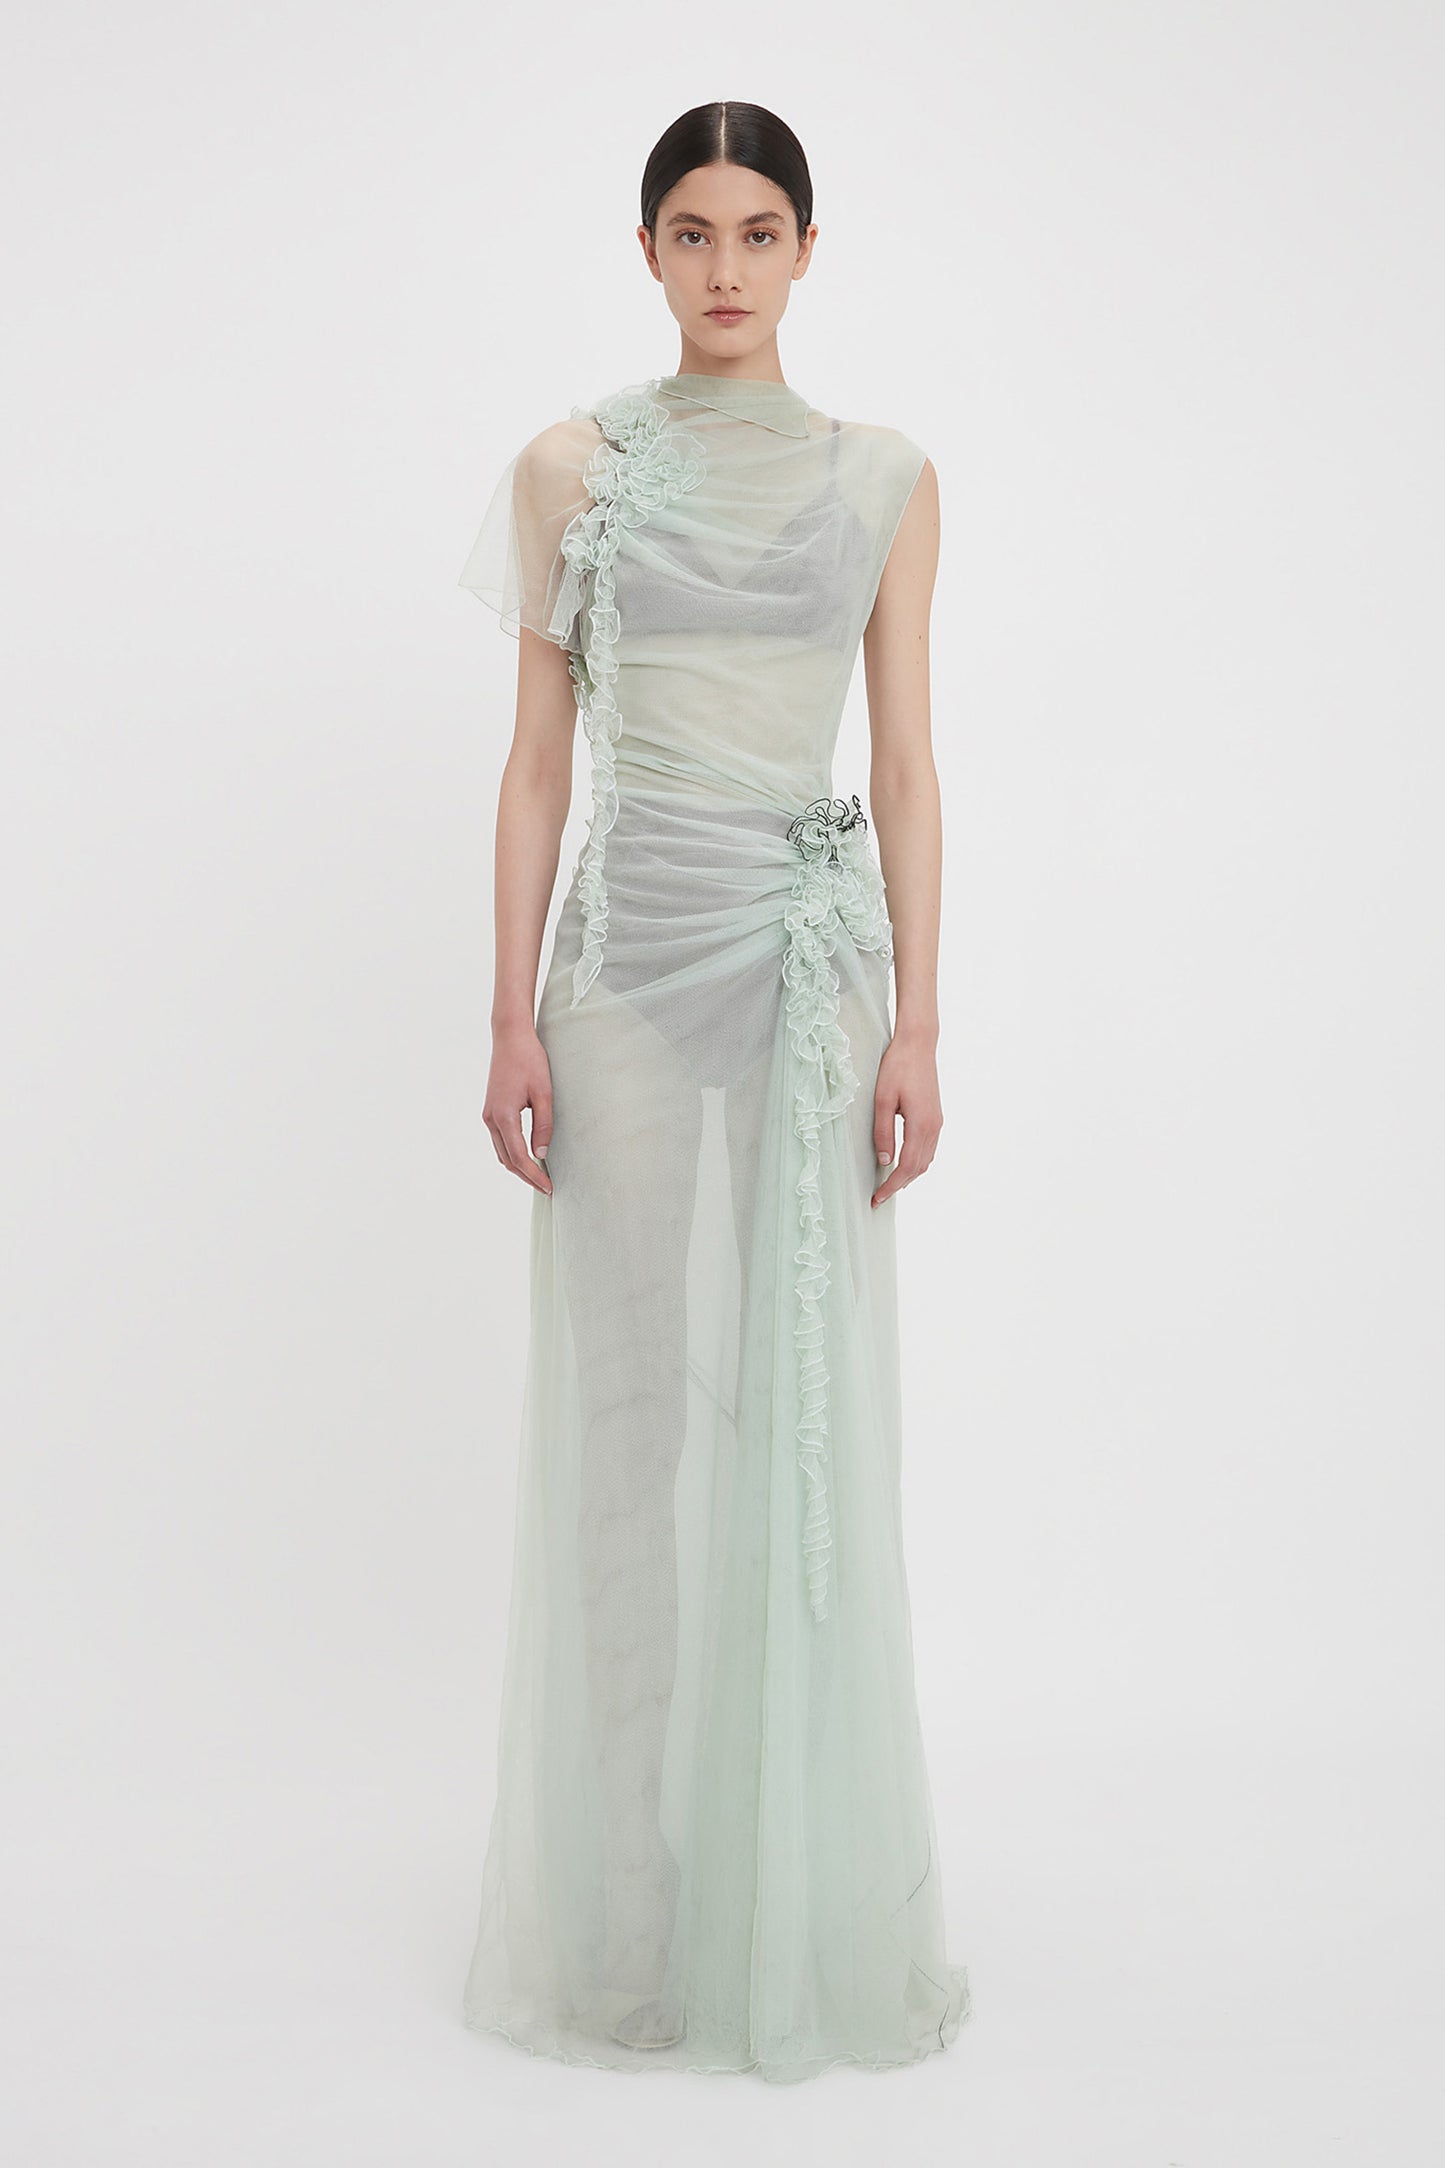 A person stands wearing the Victoria Beckham Gathered Tulle Detail Floor-Length Dress In Jade, set against a plain white background.